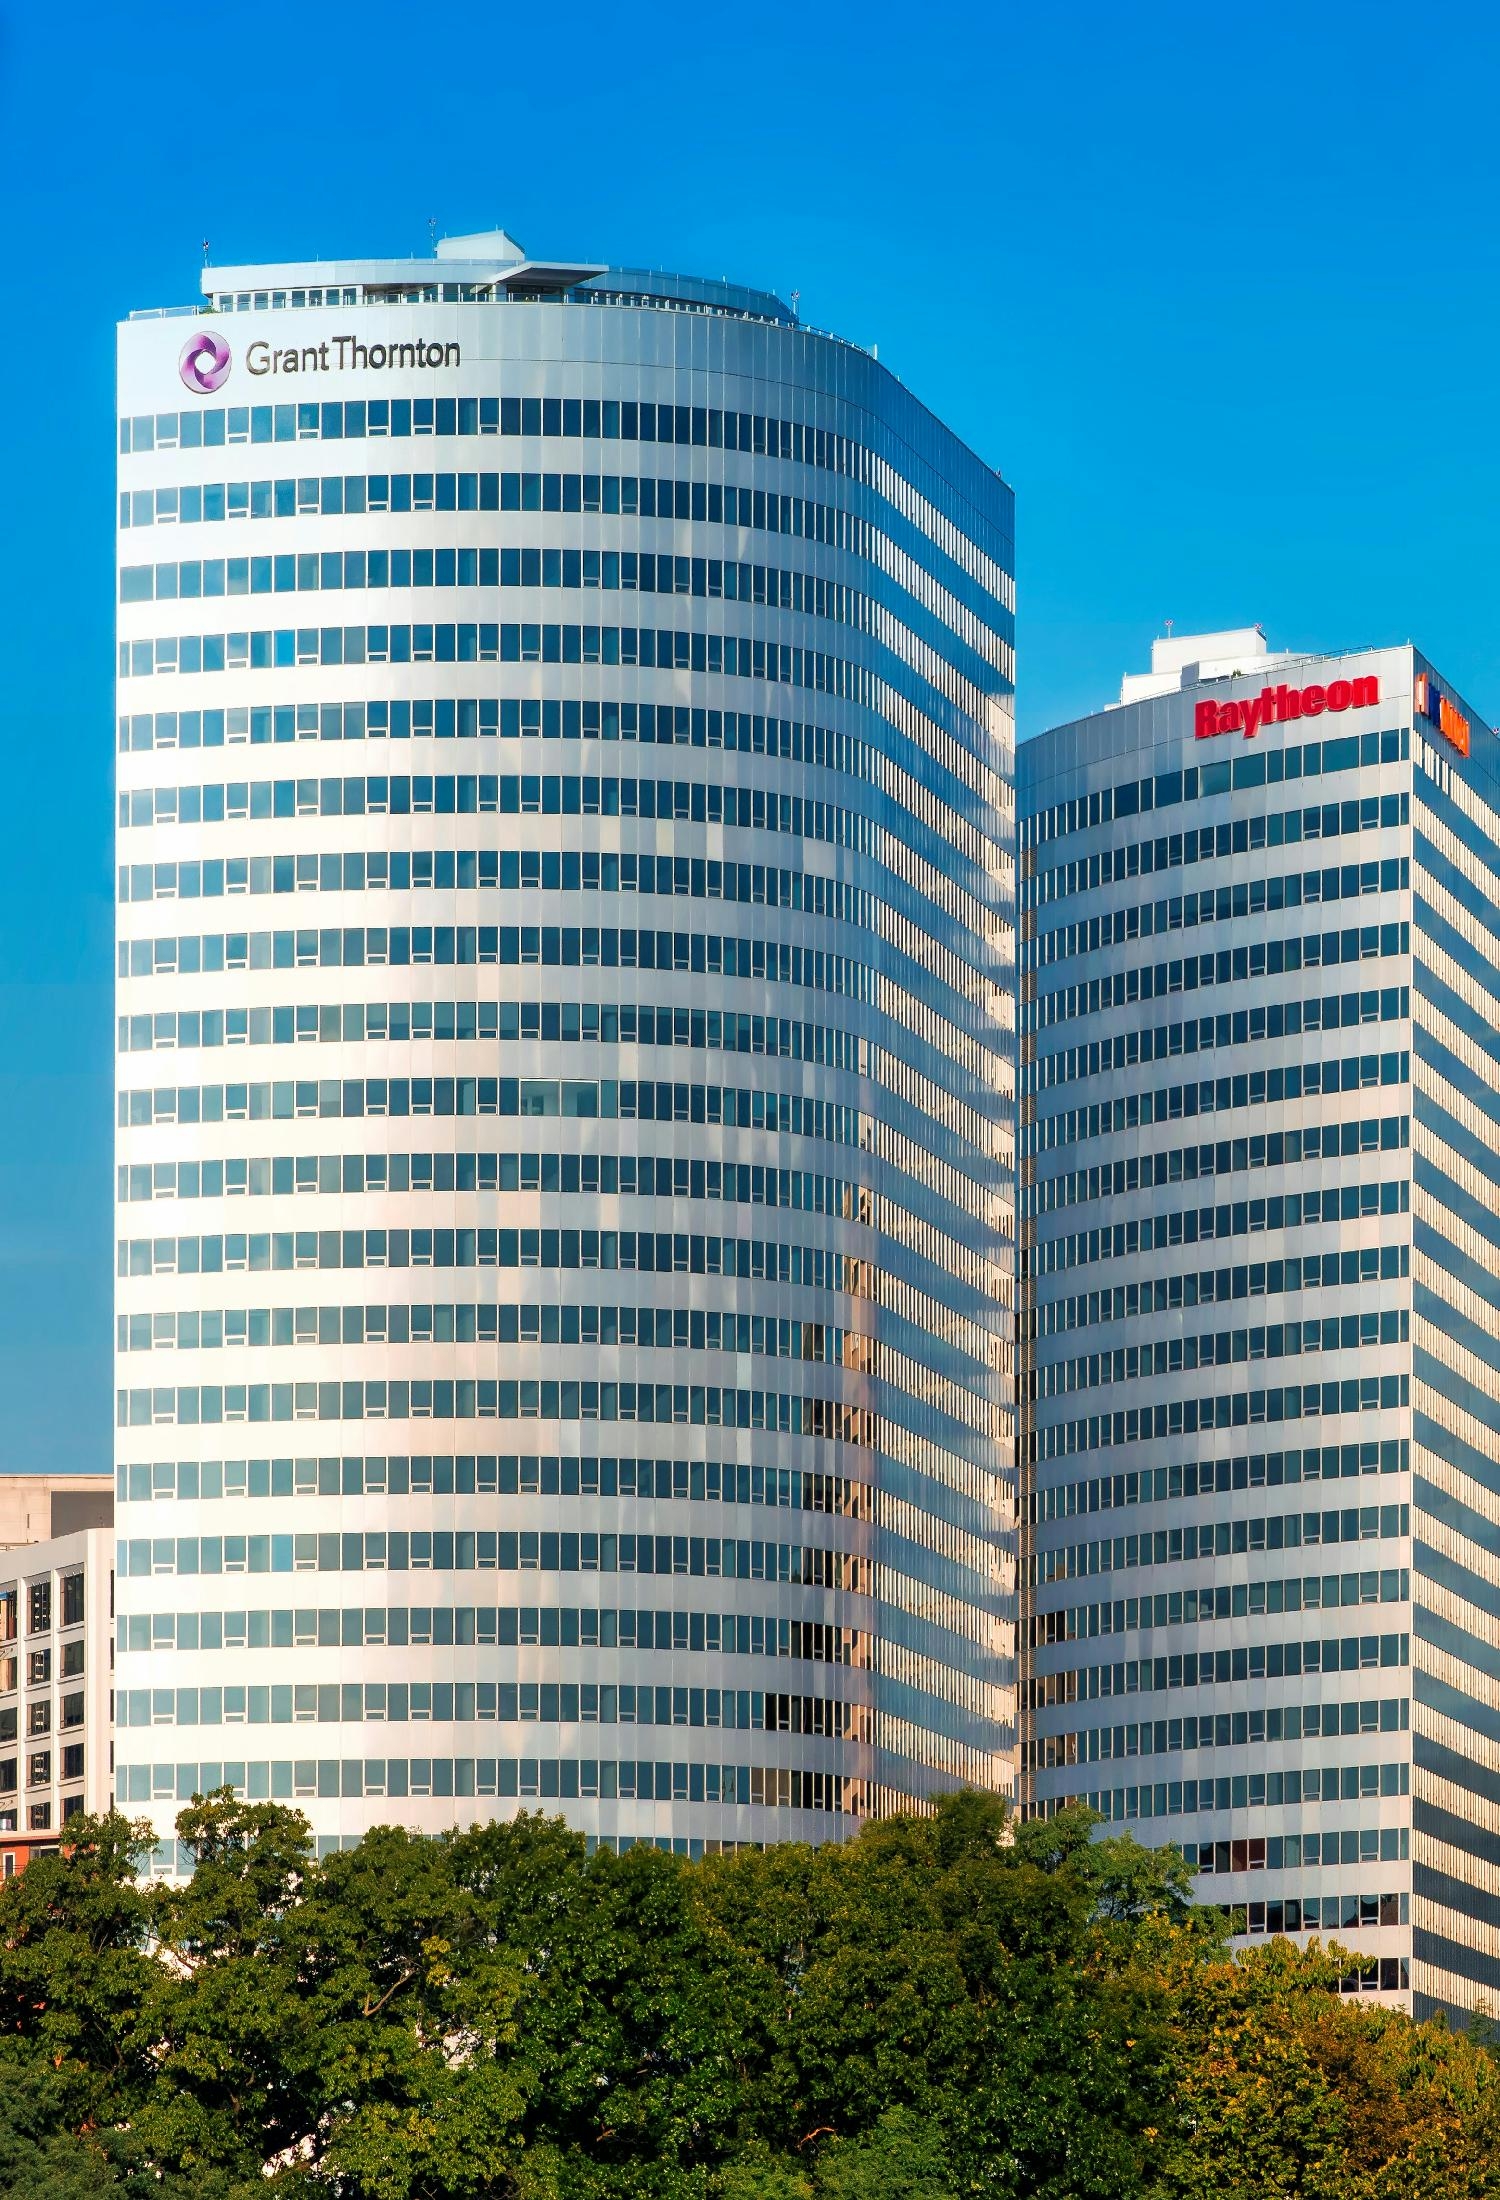 AIA is headquartered in Rosslyn, VA, conveniently located near the Pentagon, the FAA and Capitol Hill.